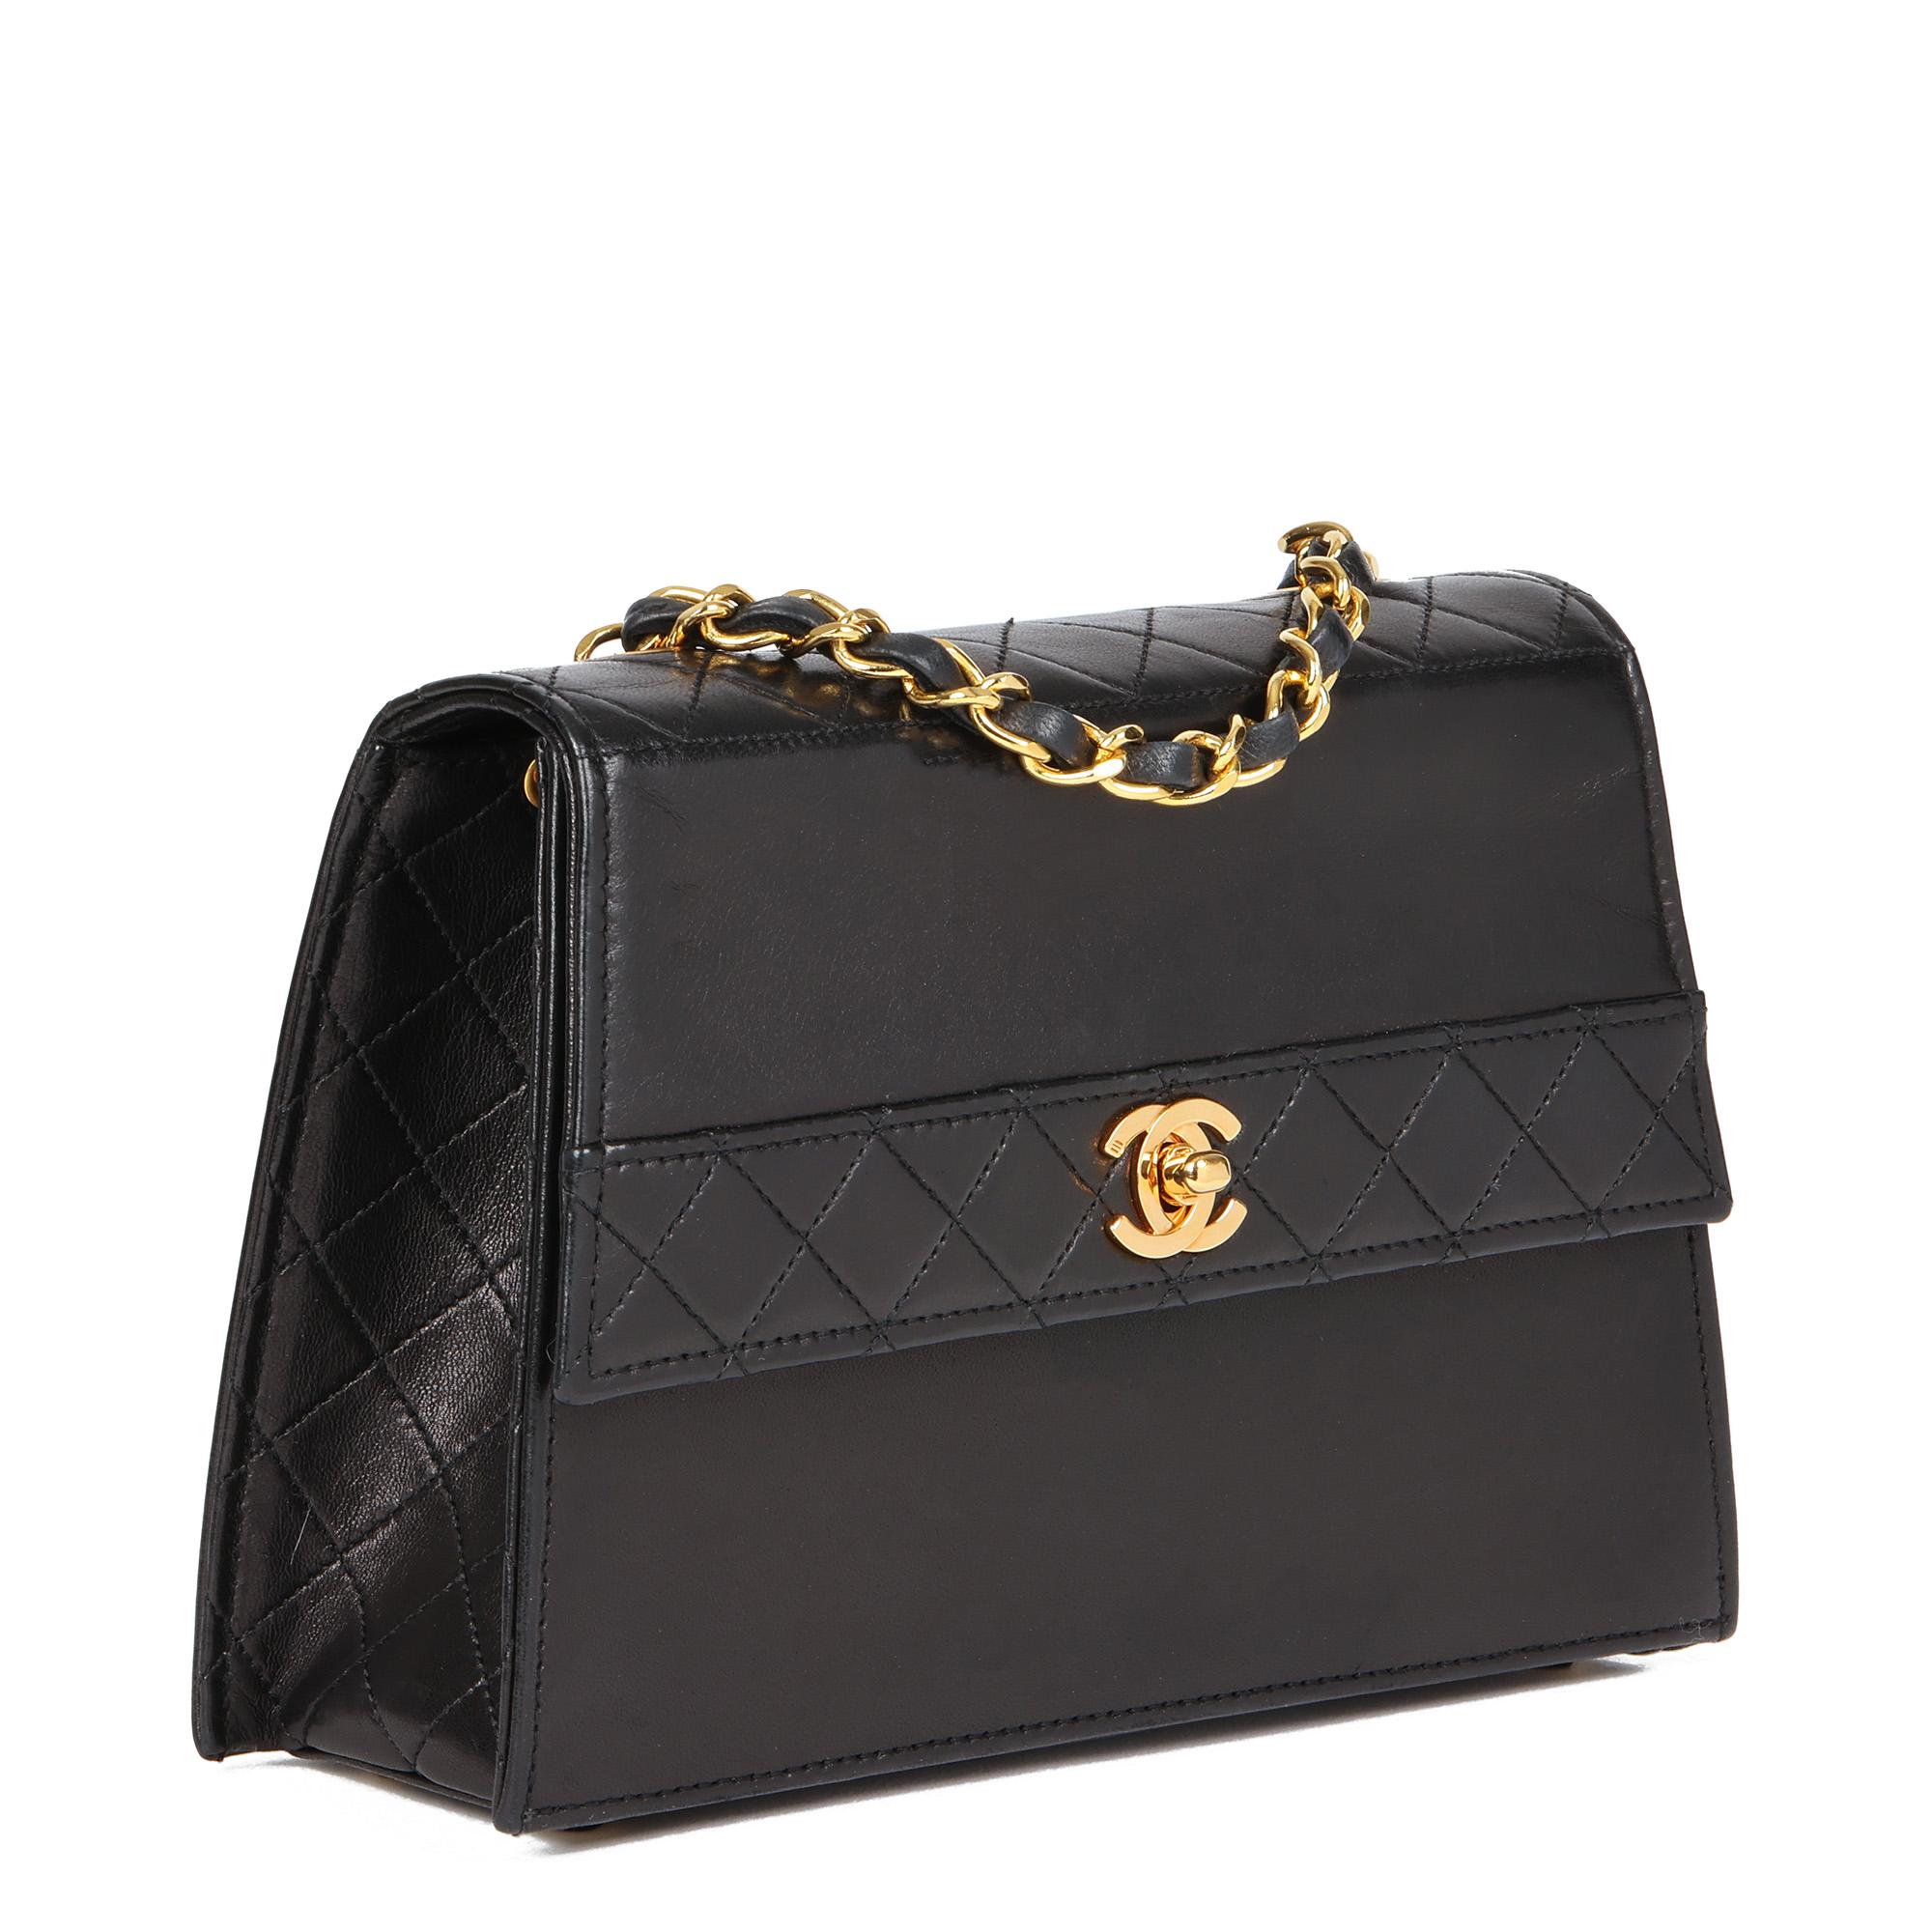 CHANEL
Black Quilted Lambskin Vintage Mini Trapeze Classic Single Flap Bag with Pouch

Xupes Reference: HB4543
Serial Number: 15836600
Age (Circa): 1990
Accompanied By: Chanel Dust Bag, Interior Pouch
Authenticity Details: Serial Sticker (Made in